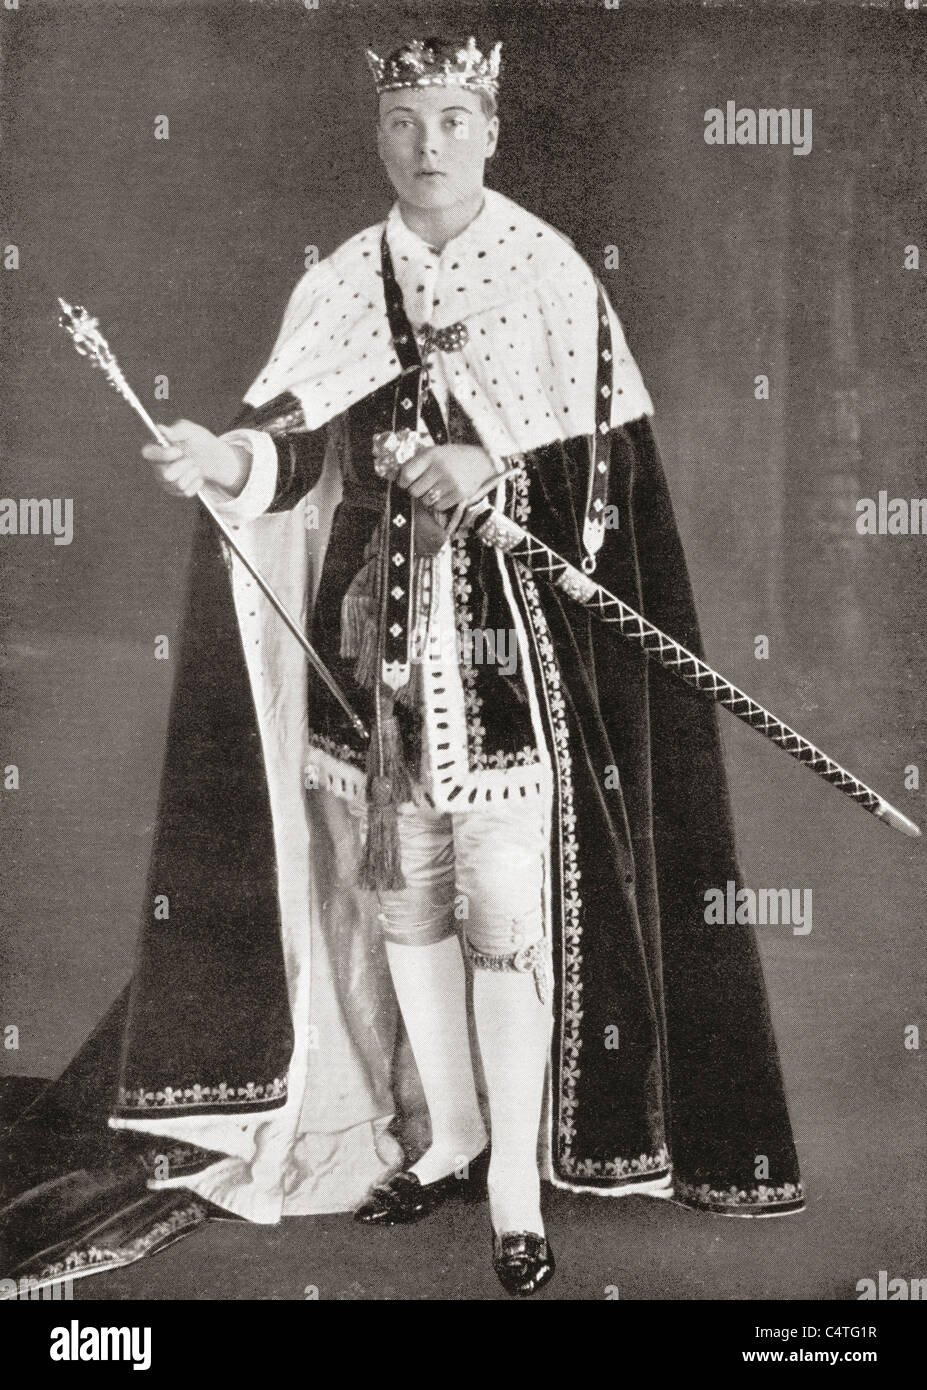 The Prince of Wales, later King Edward VIII, in his investiture Robes in 1911. Stock Photo